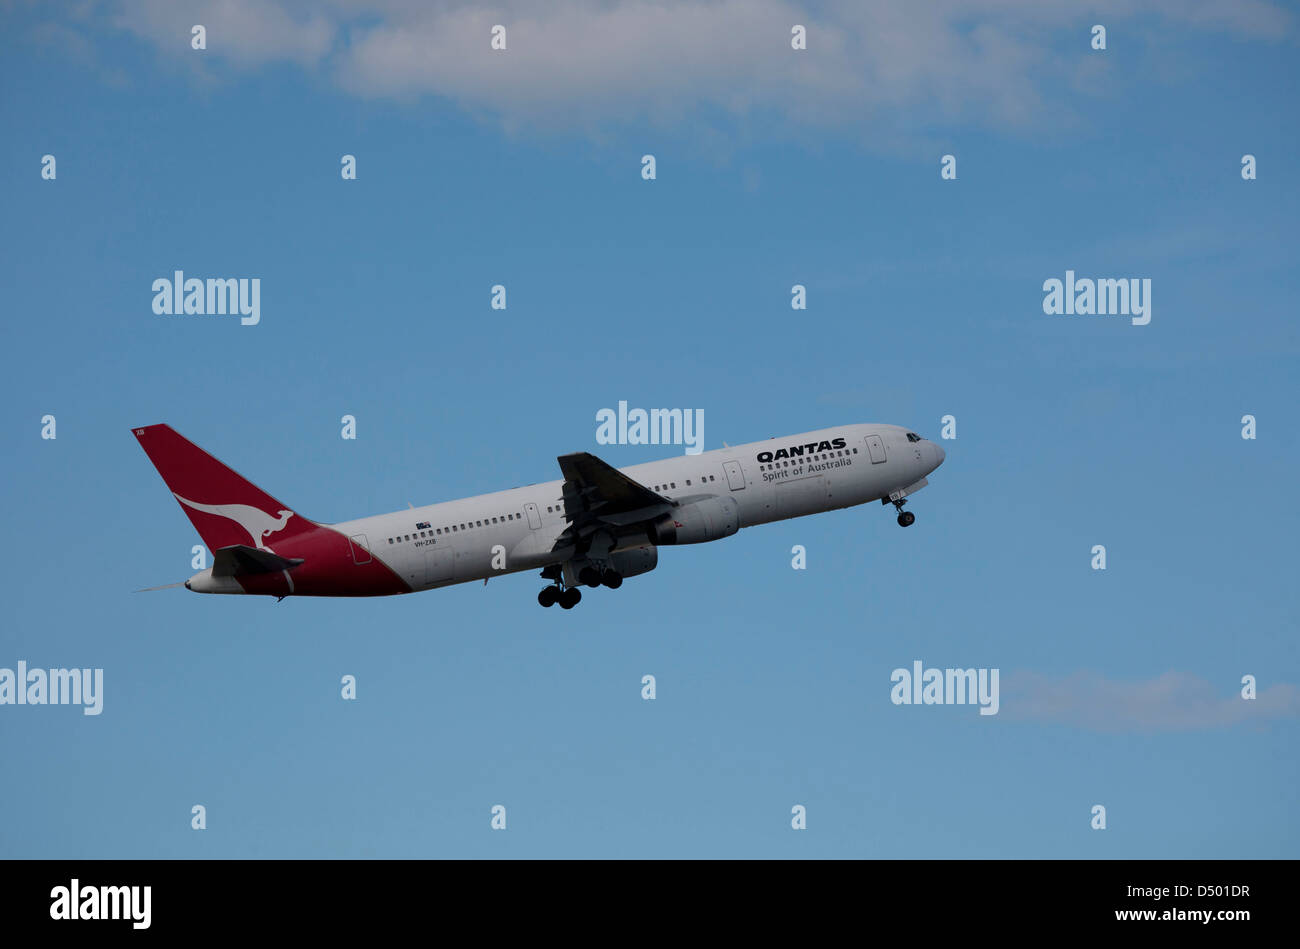 Qantas VH-ZXB Boeing 767 departing Jet Aircraft Kingsford Smith Airport Sydney Australia now retired in Roswell, New Mexico USA Stock Photo